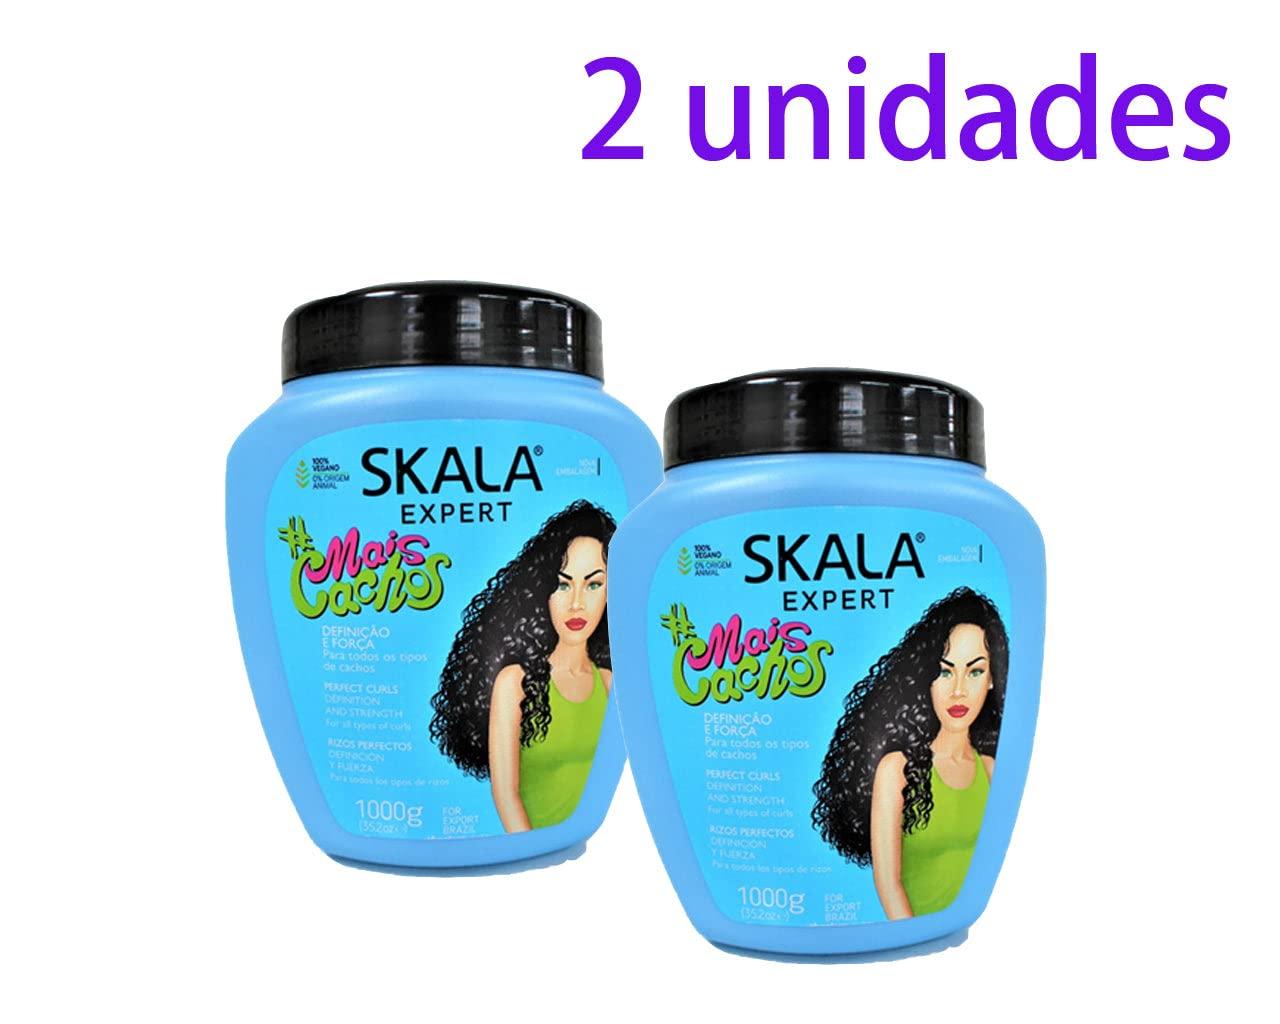 SKALA Expert Mais Cachos 2 IN 1 Conditioning Treatment Cream 1000 KG 35.2  Ounce (Pack of 2) 16 Ounce (Pack of 2)